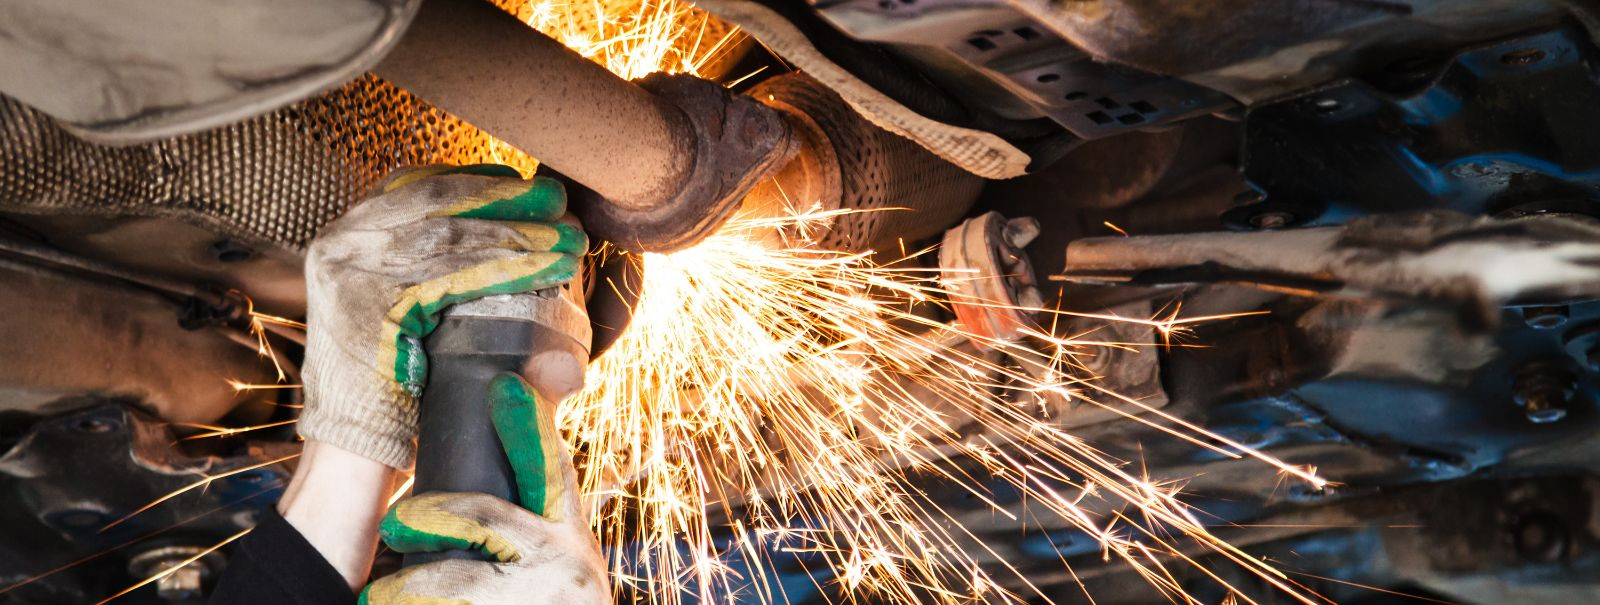 Welding is a fabrication process that joins materials, usually metals or thermoplastics, by using high heat to melt the parts together and allowing them to cool